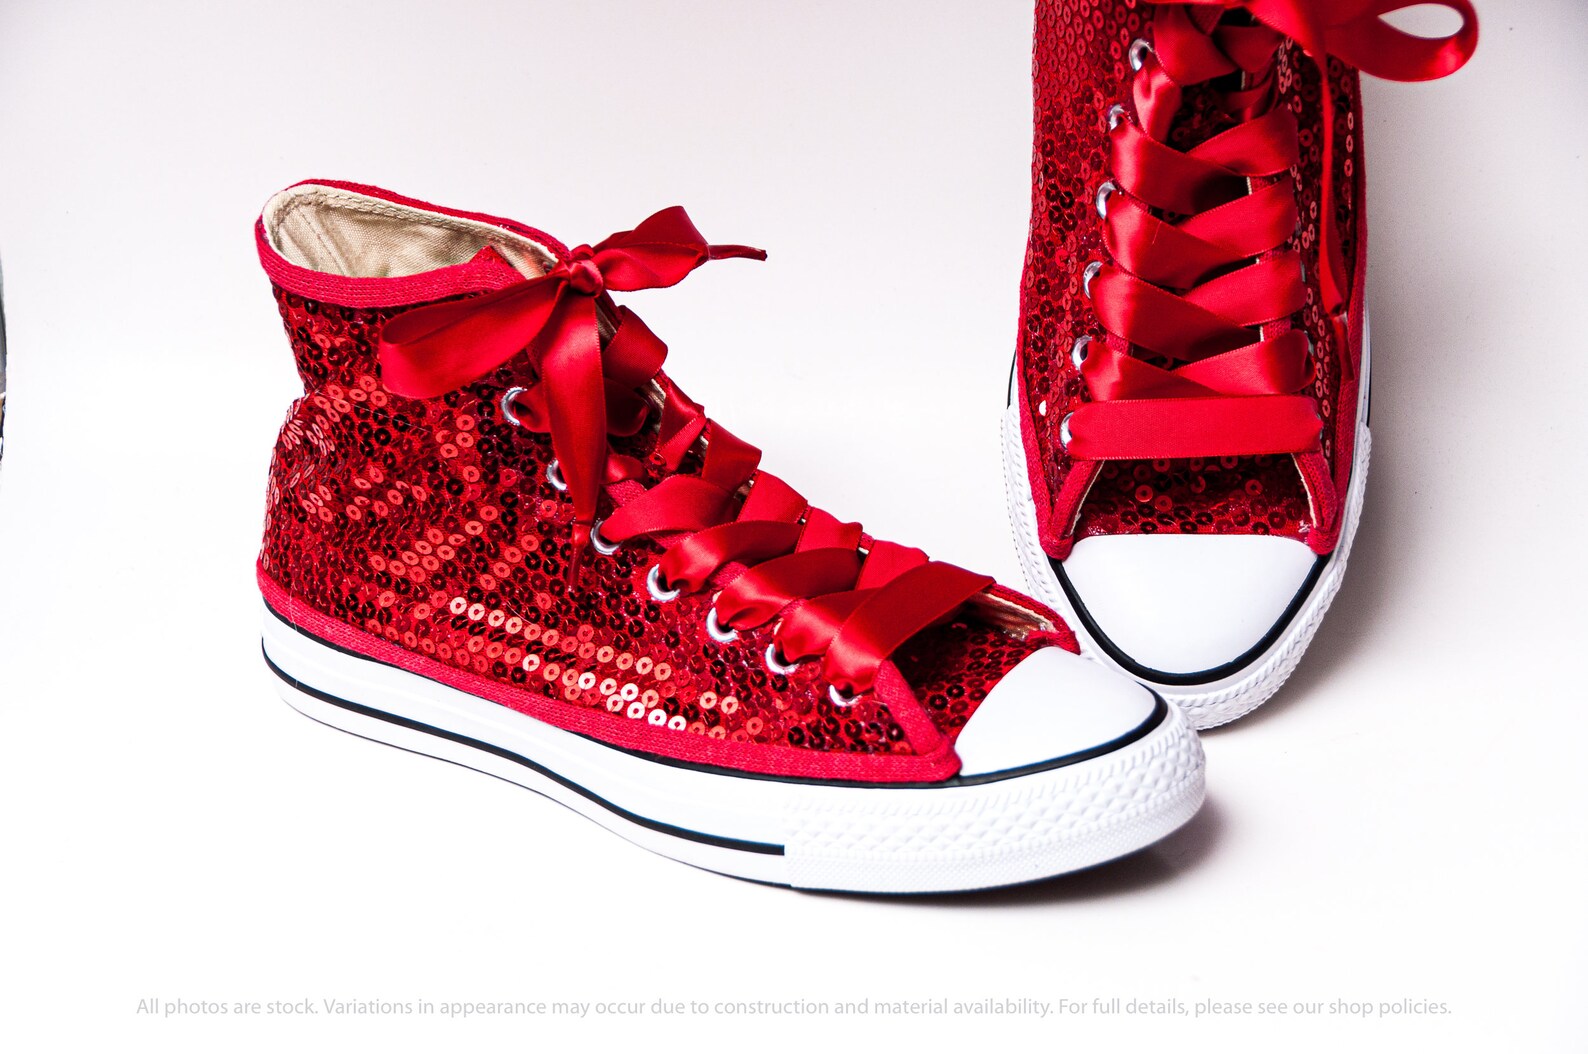 Red Sequin Converse High Top Sneakers | Etsy